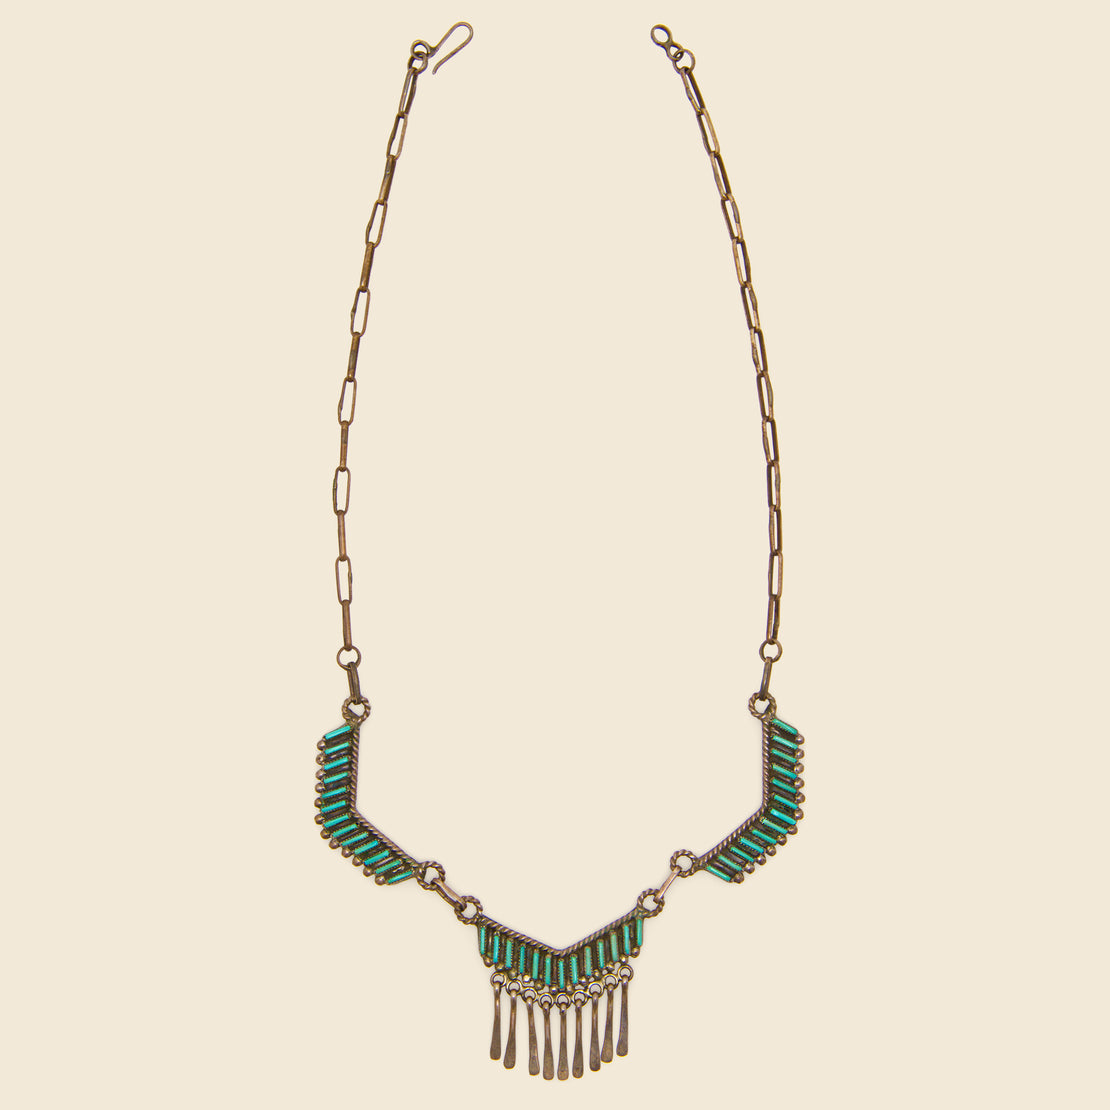 Vintage Pieced Necklace - Silver & Turquoise